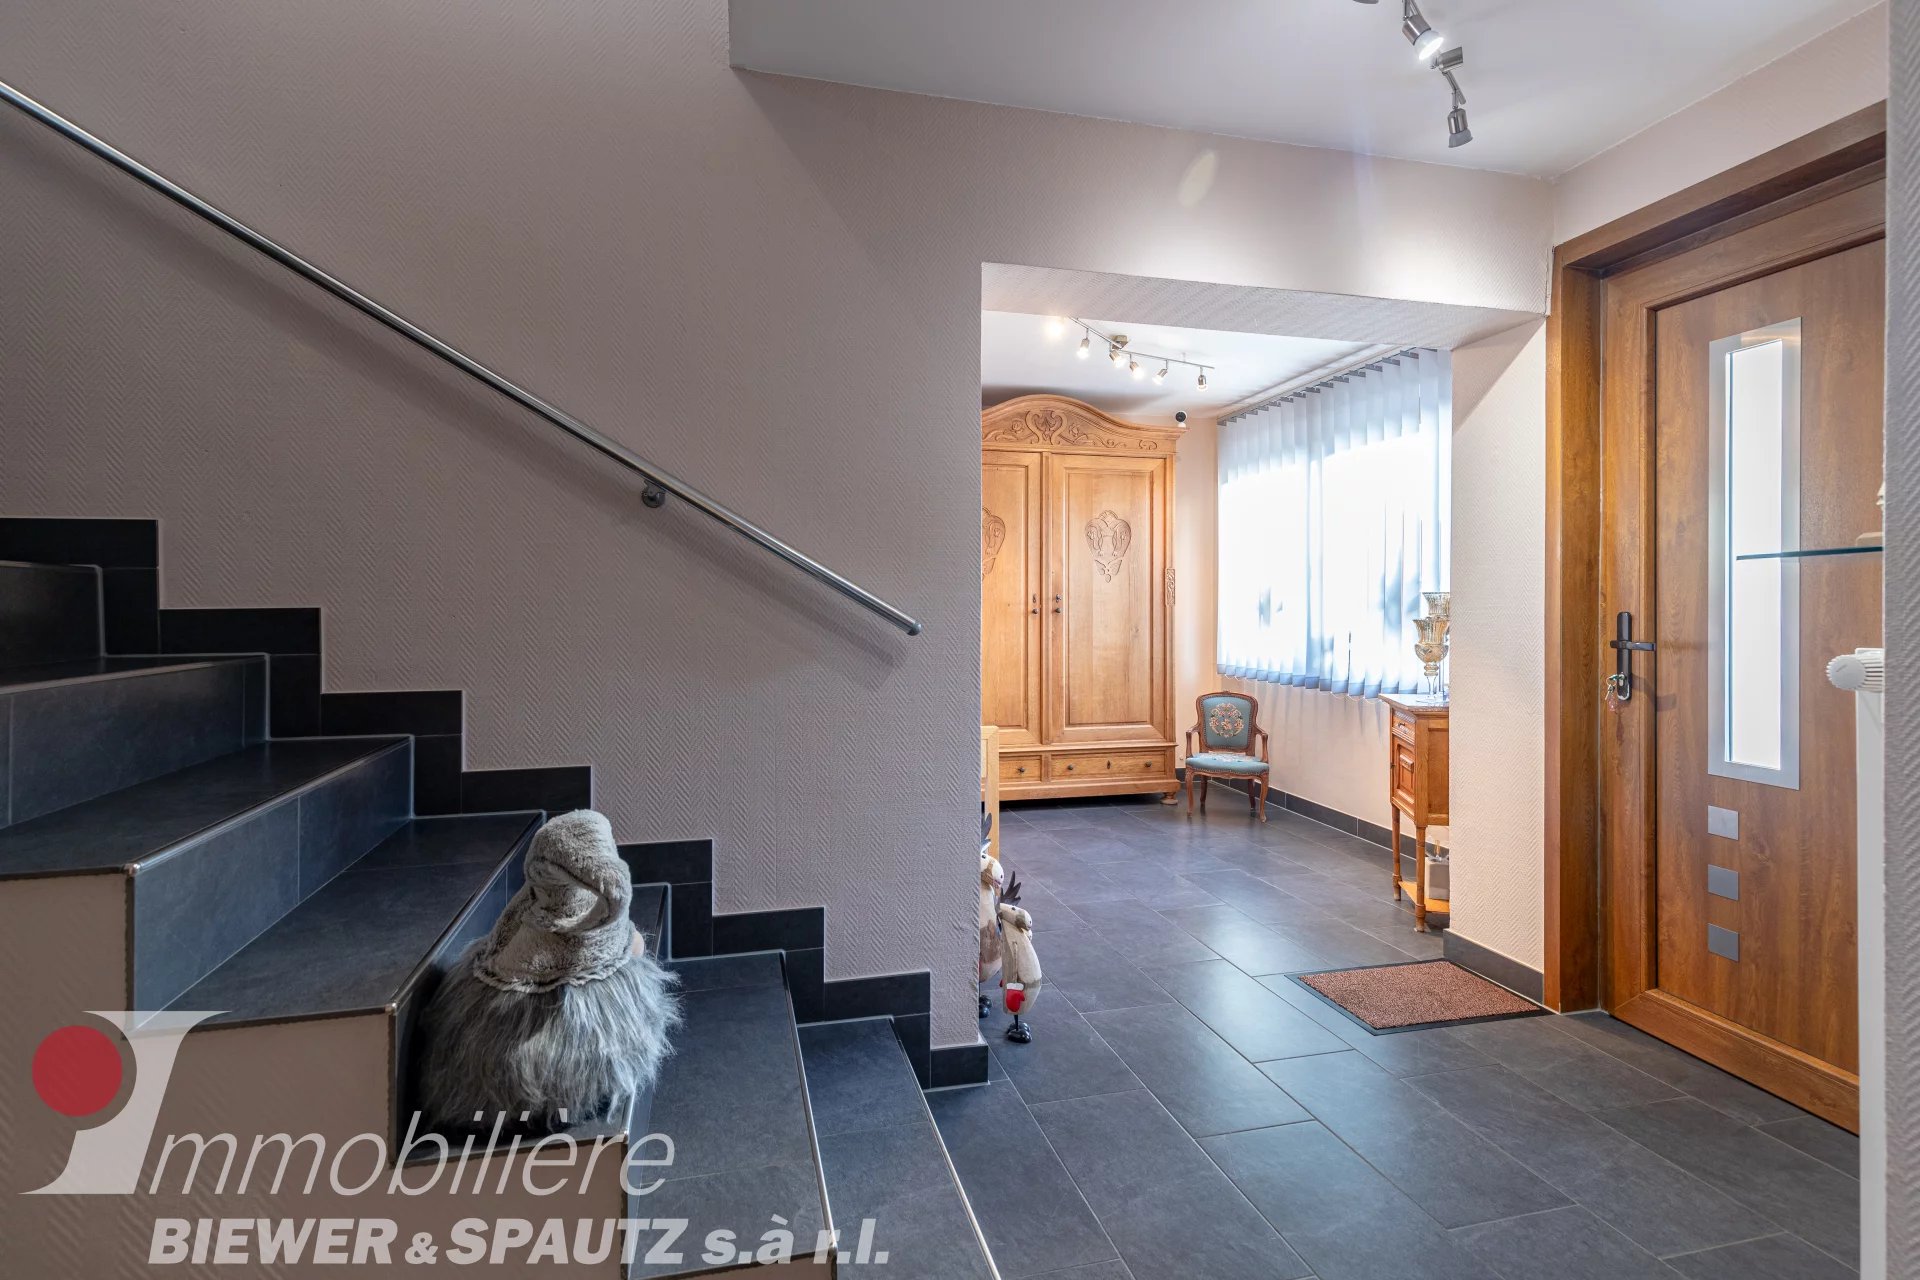 FOR SALE - House with 4 (5) bedrooms in Altrier